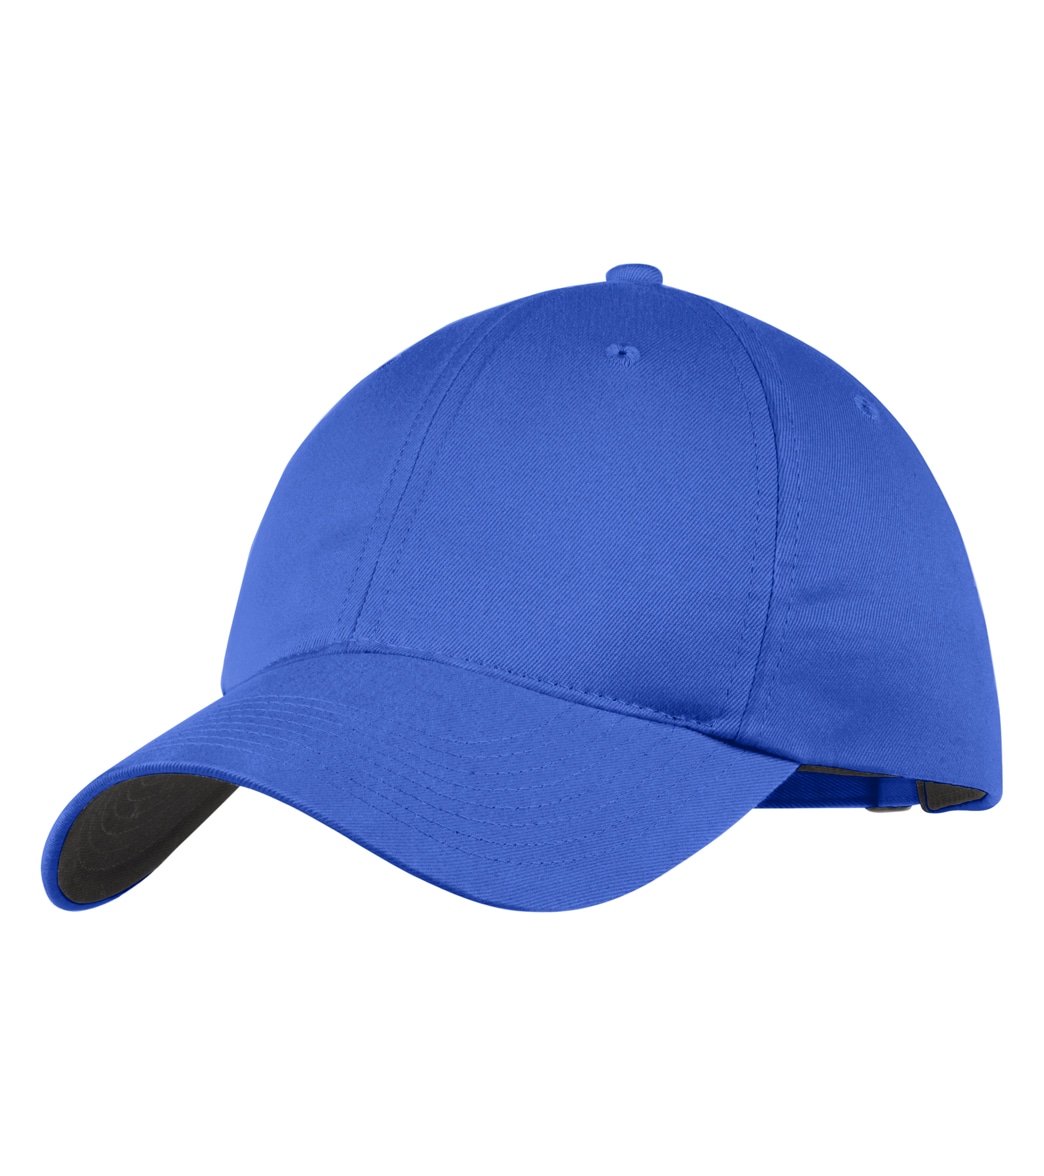 Nike Unstructured Twill Hat - Game Royal One Size Cotton - Swimoutlet.com